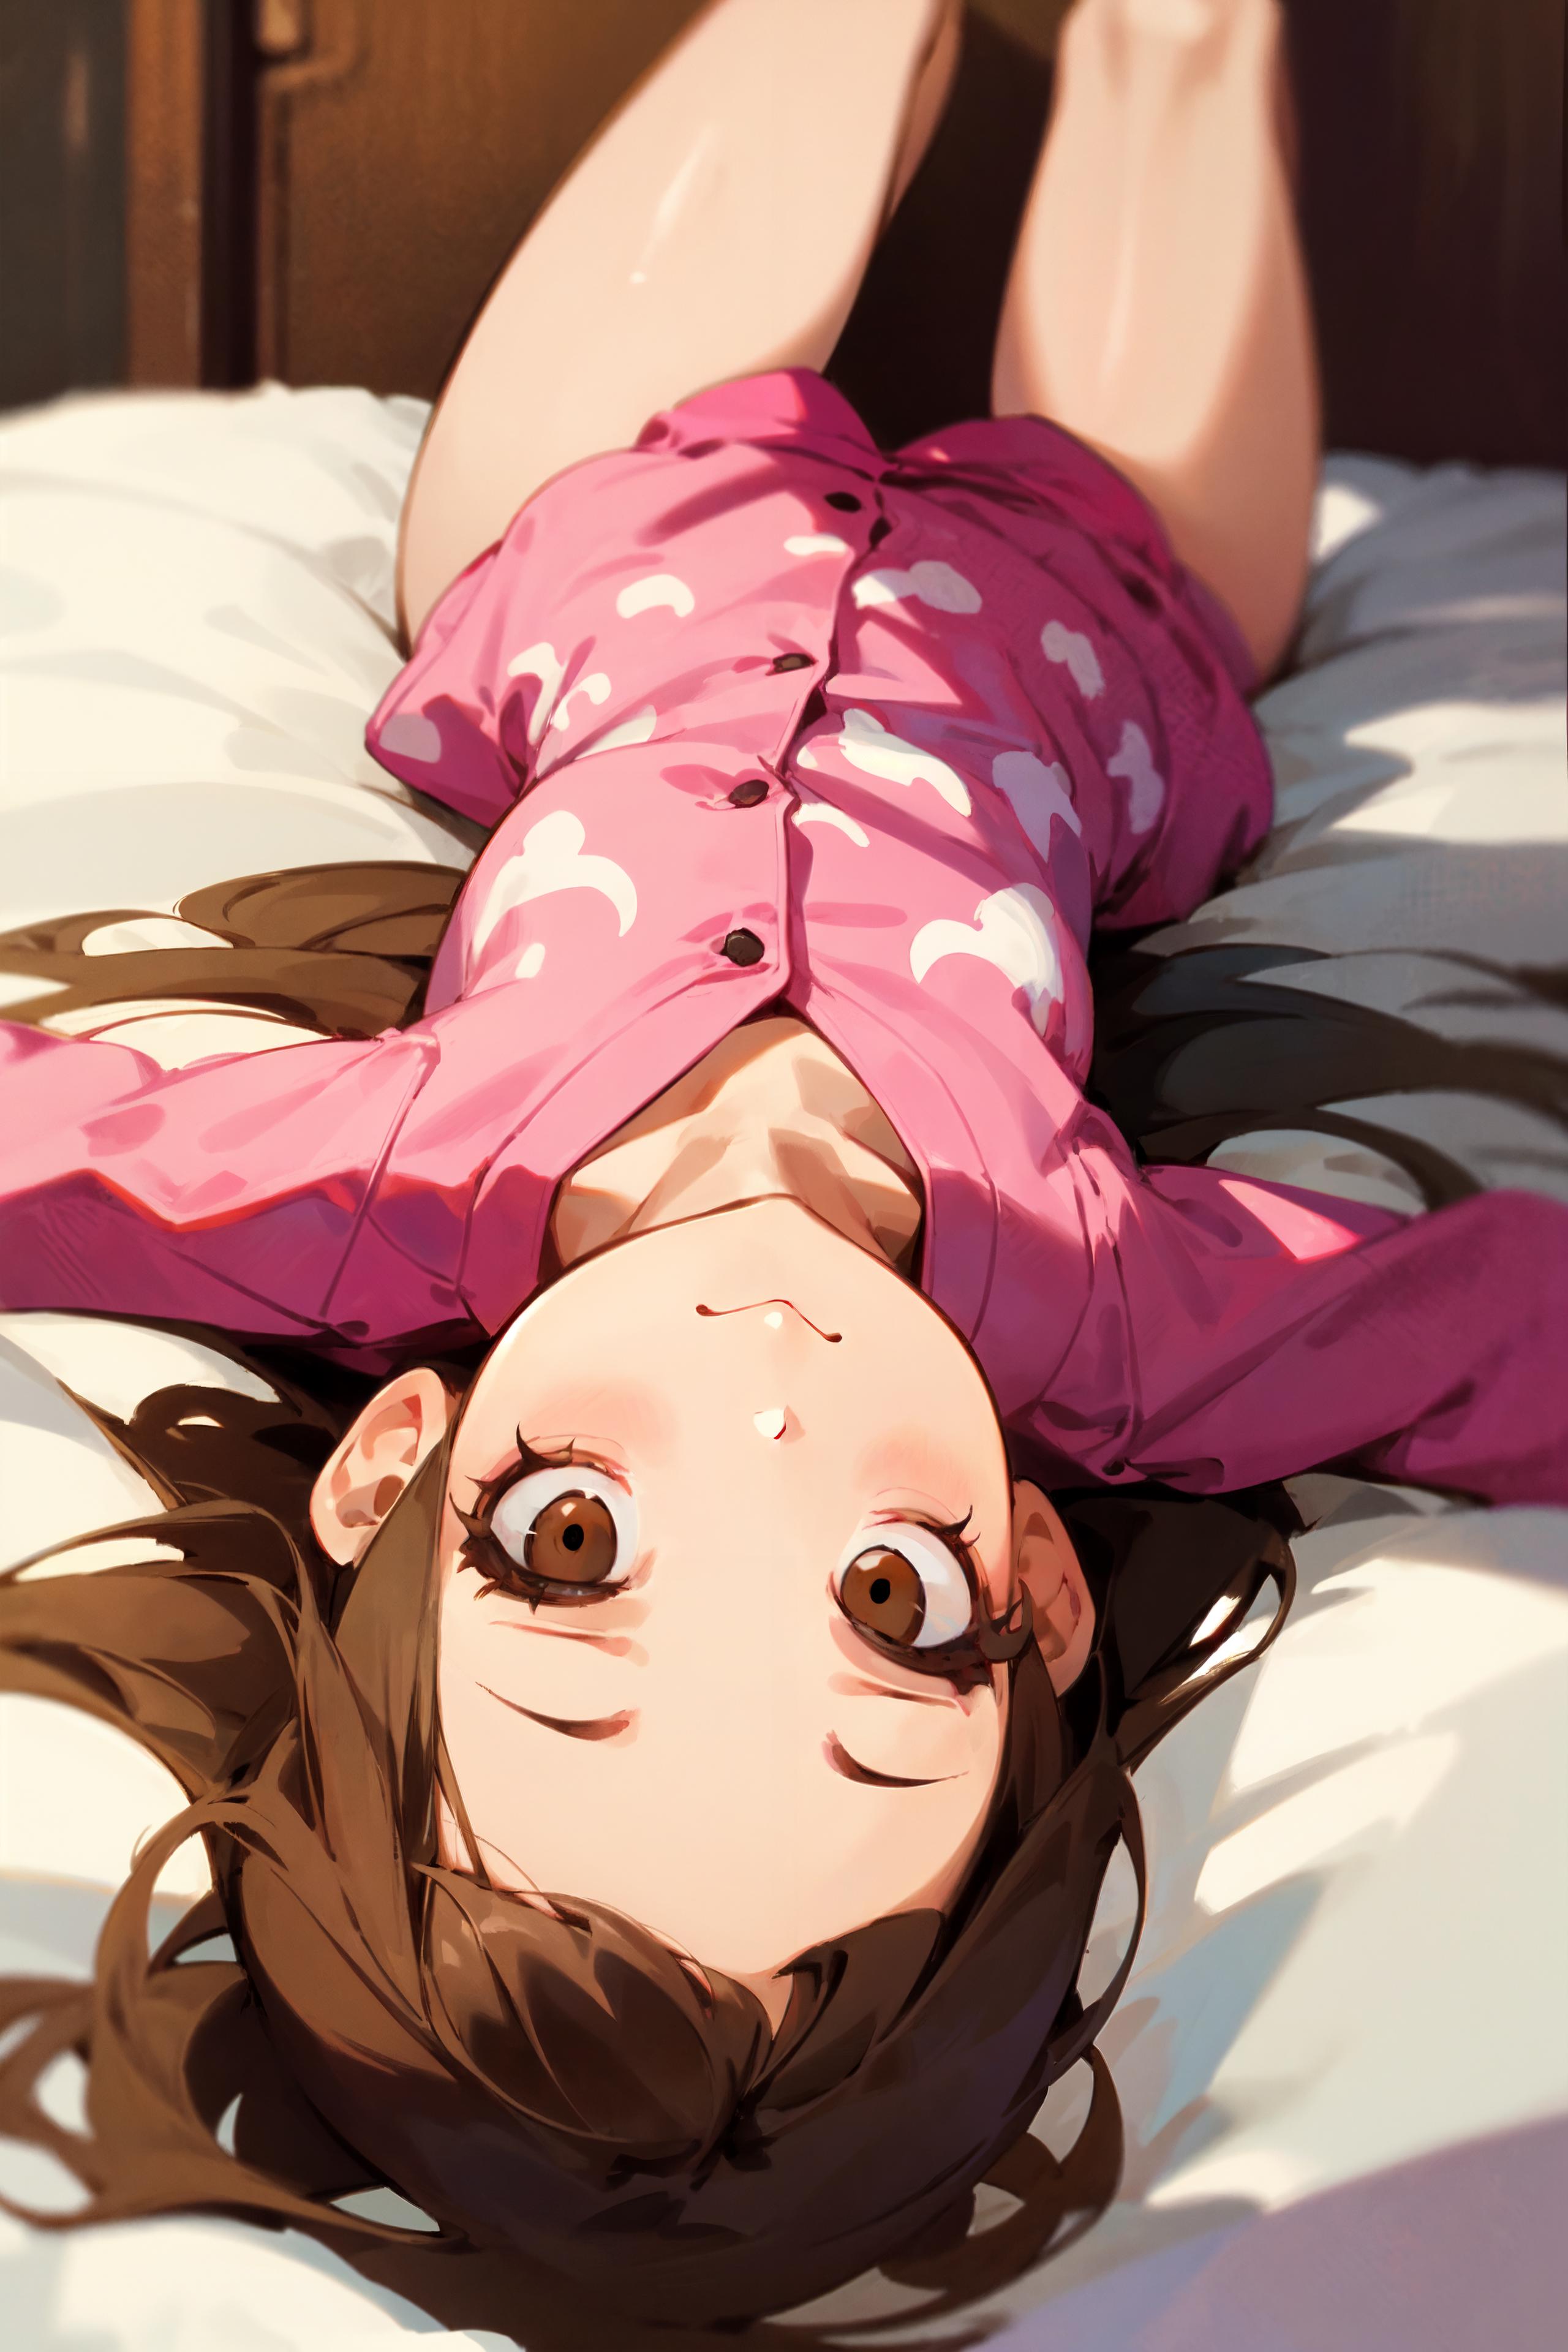 A young woman wearing a pink shirt is lying on a bed.